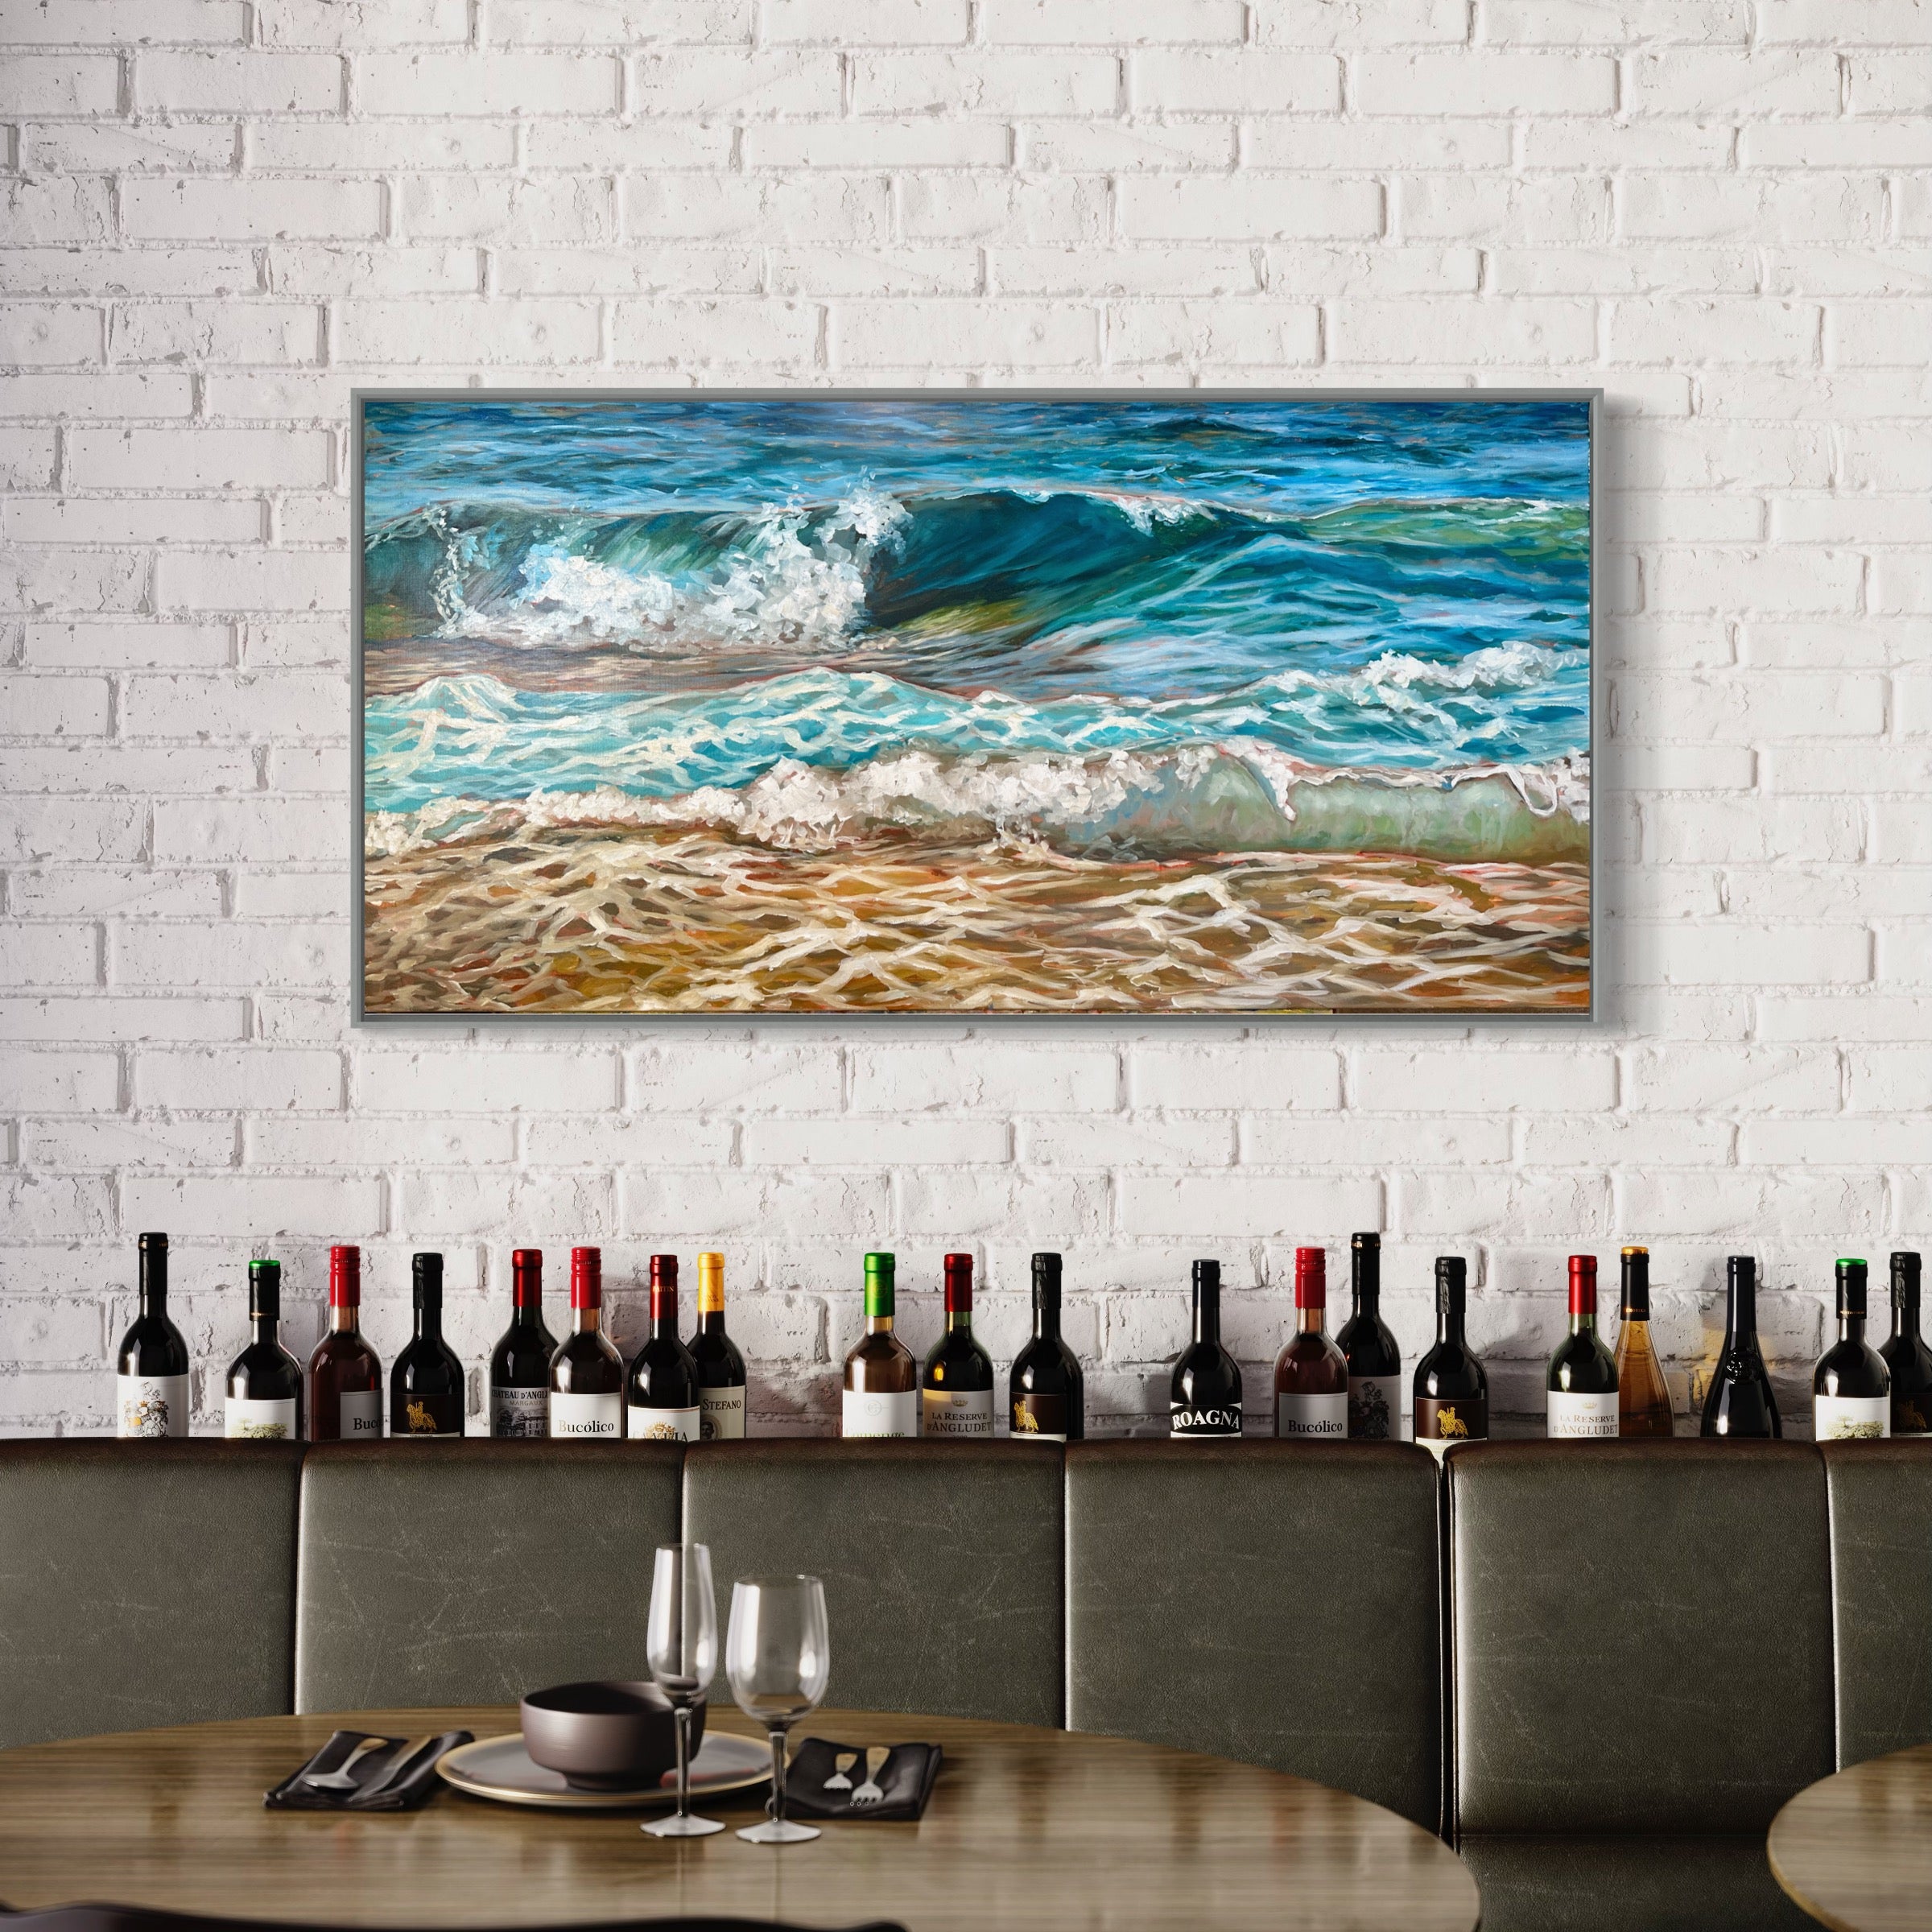 Comes In Waves | Oil on Canvas | 48" x 24"